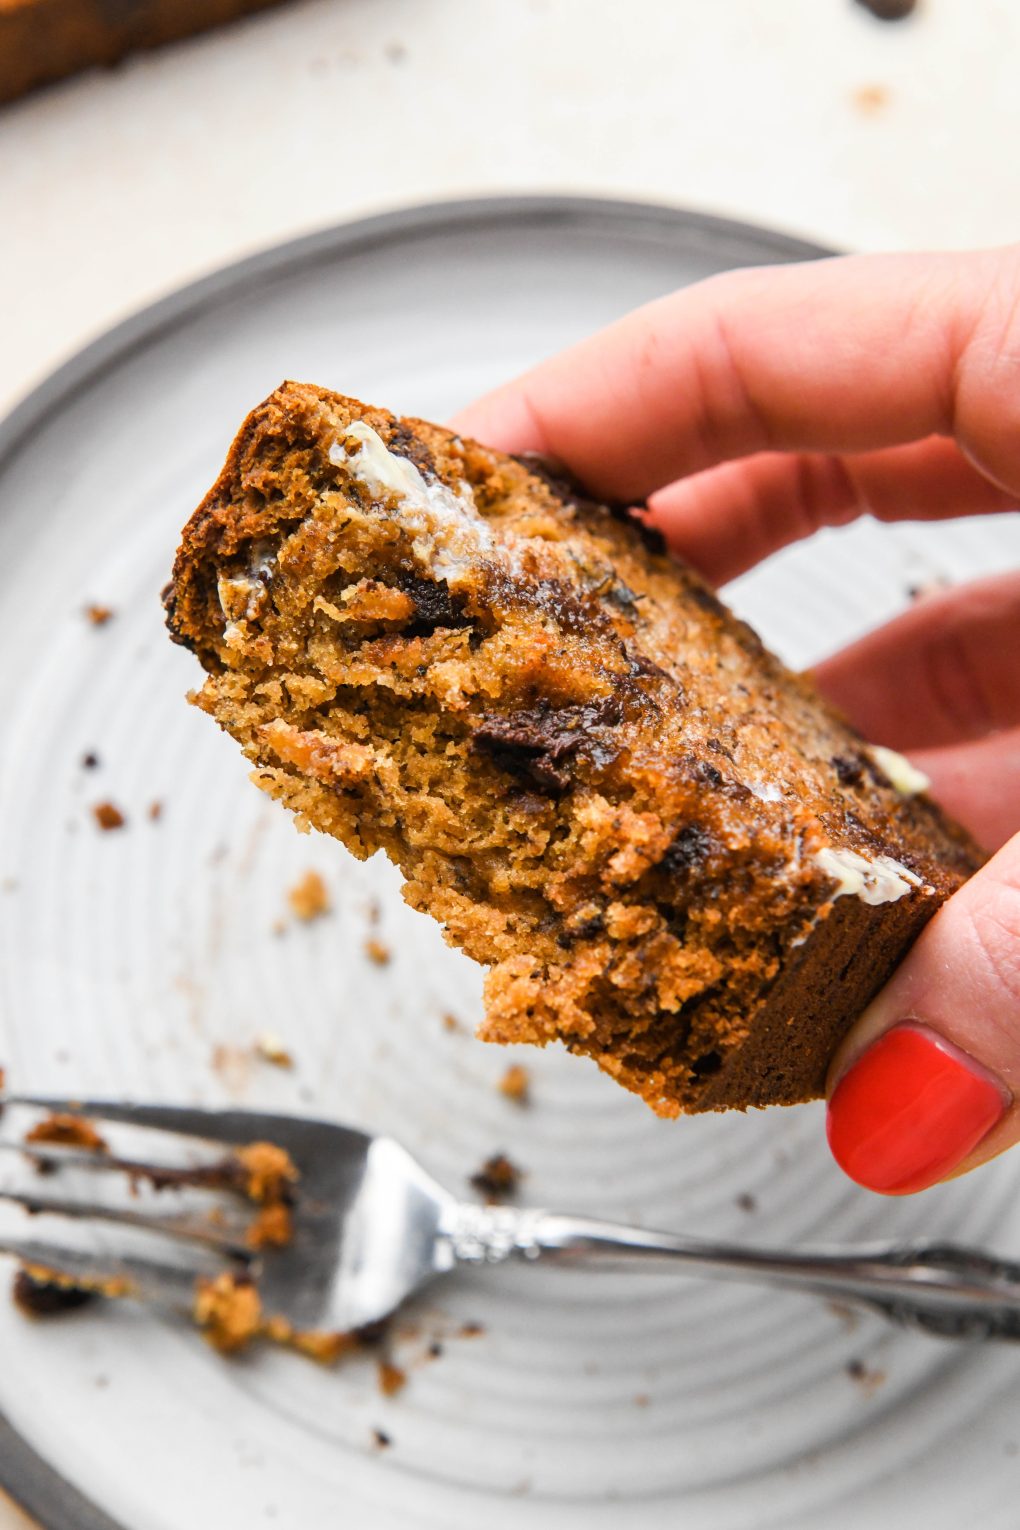 A hand lifting up a slice of banana bread with a few bites take out to show the soft interior.